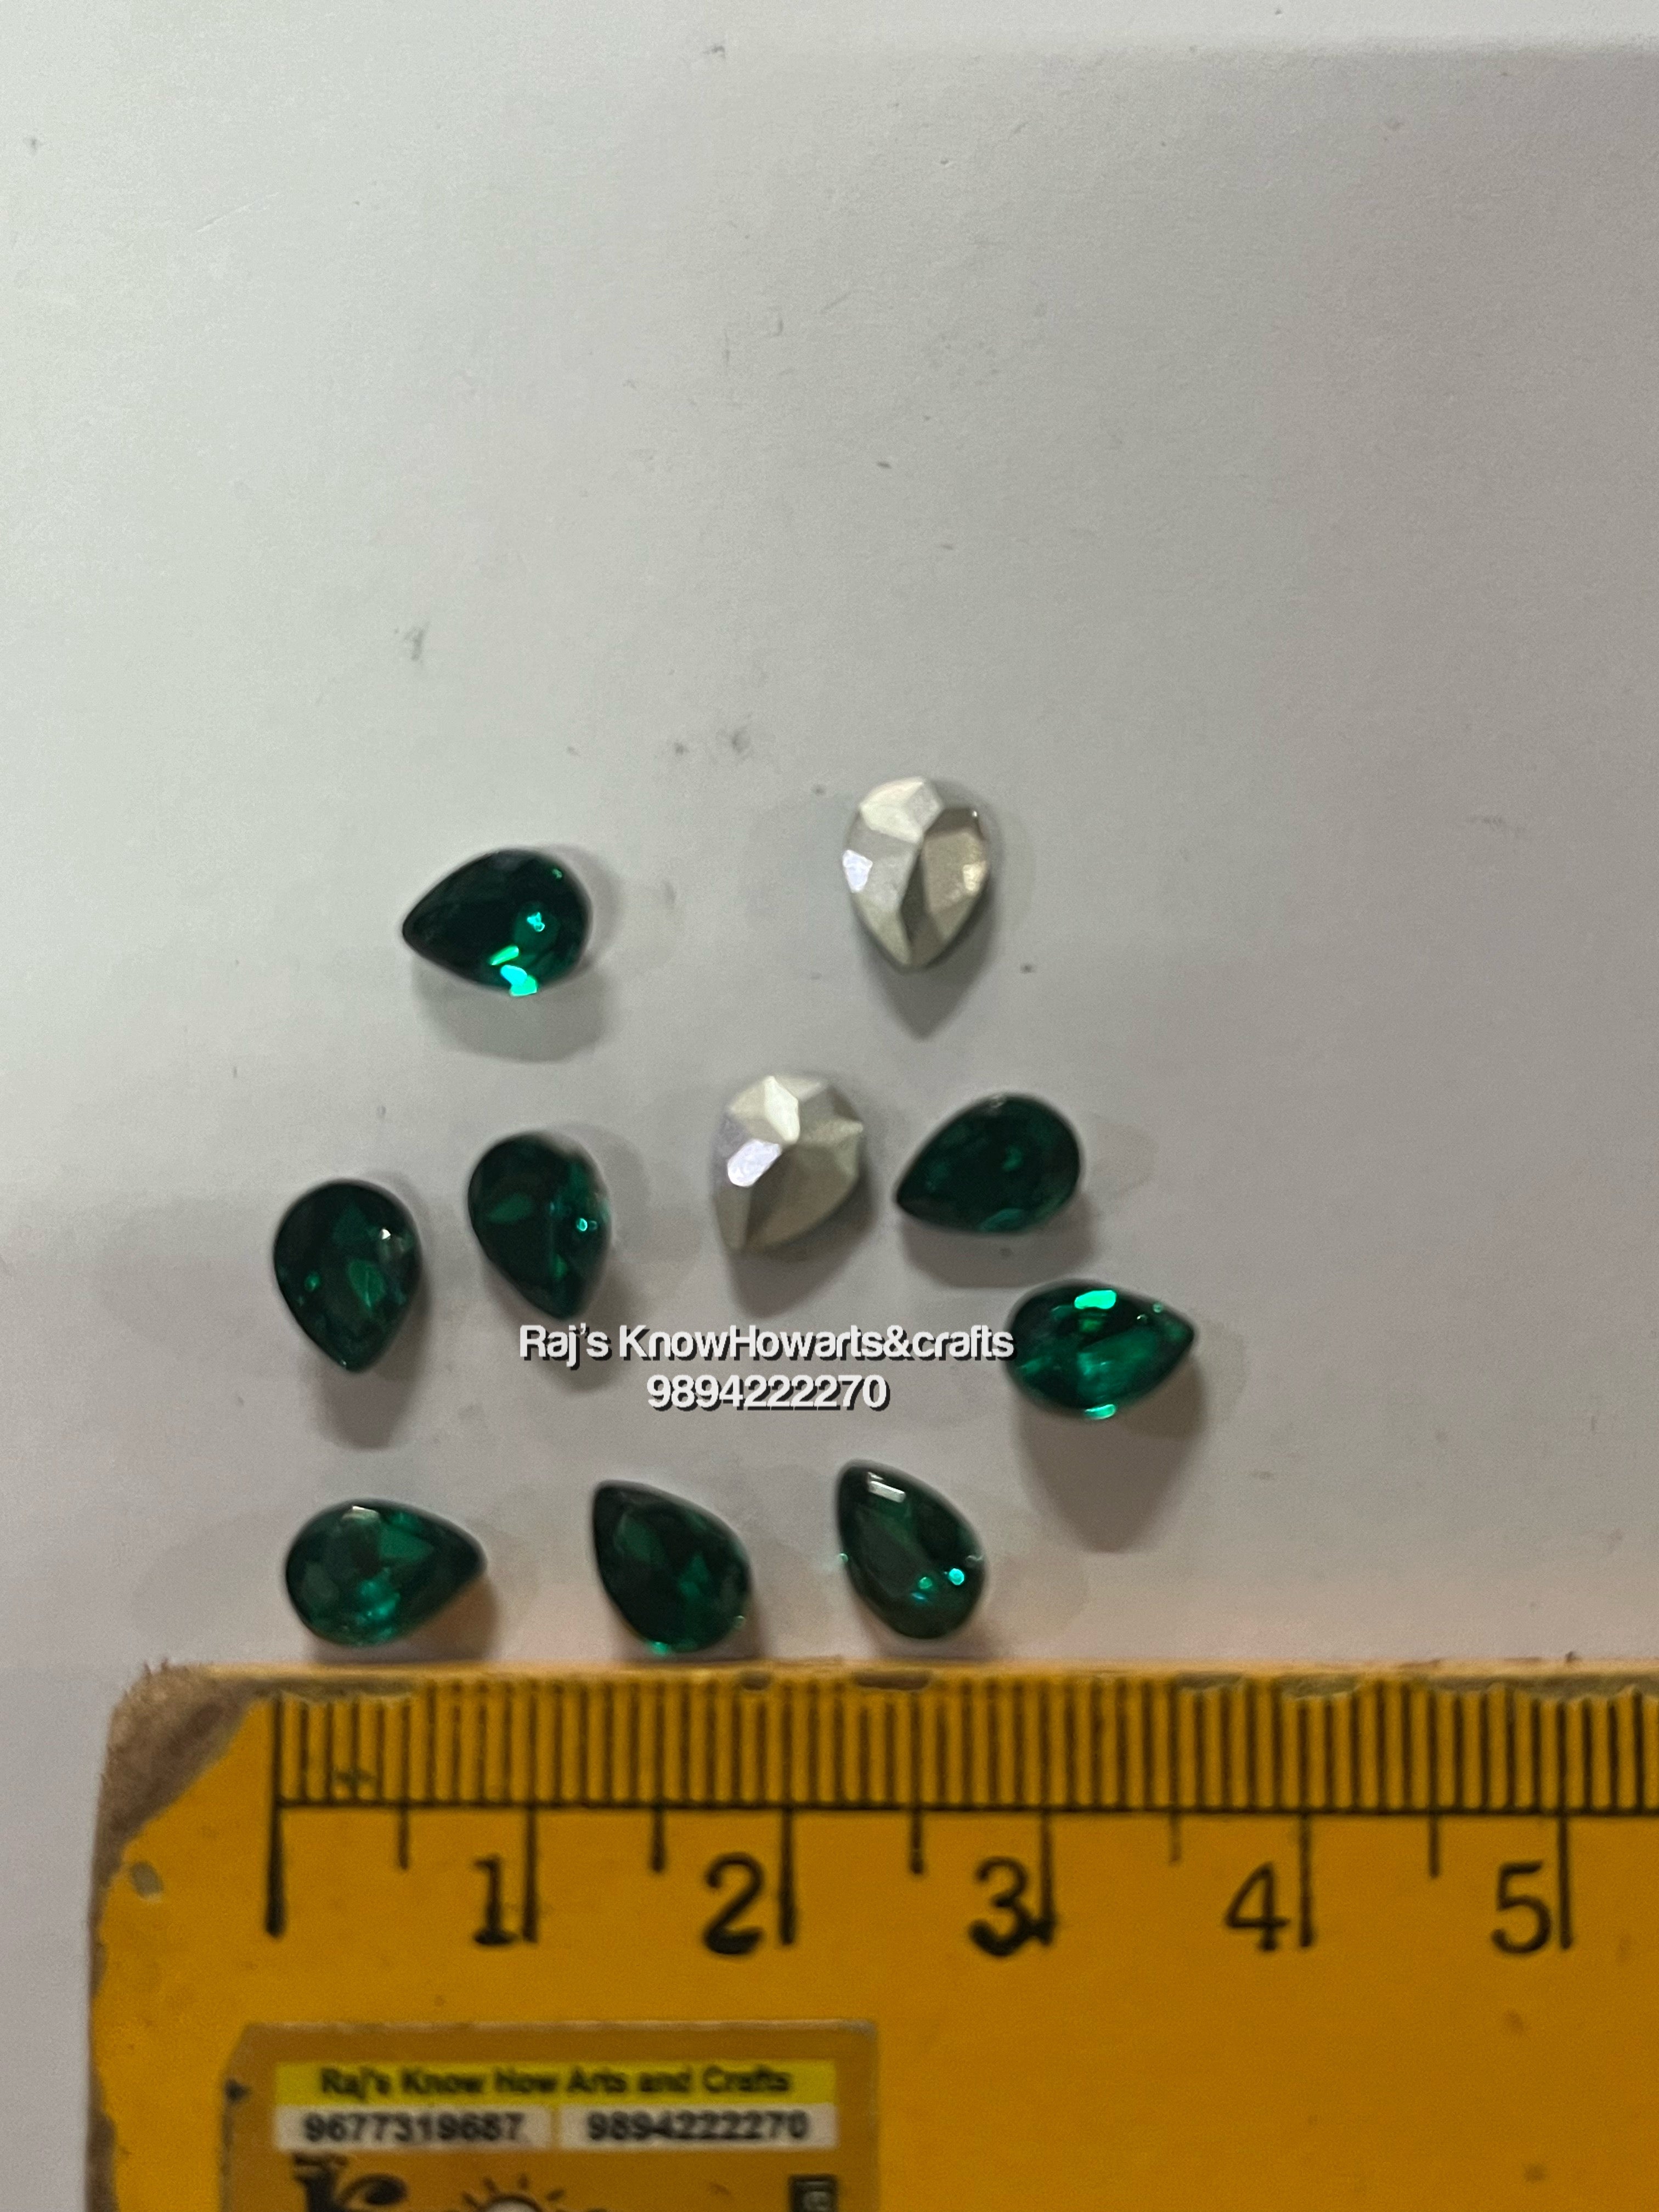 8x6 green Thilakam Tanjore Painting American diamond stones-10 stones in a pack